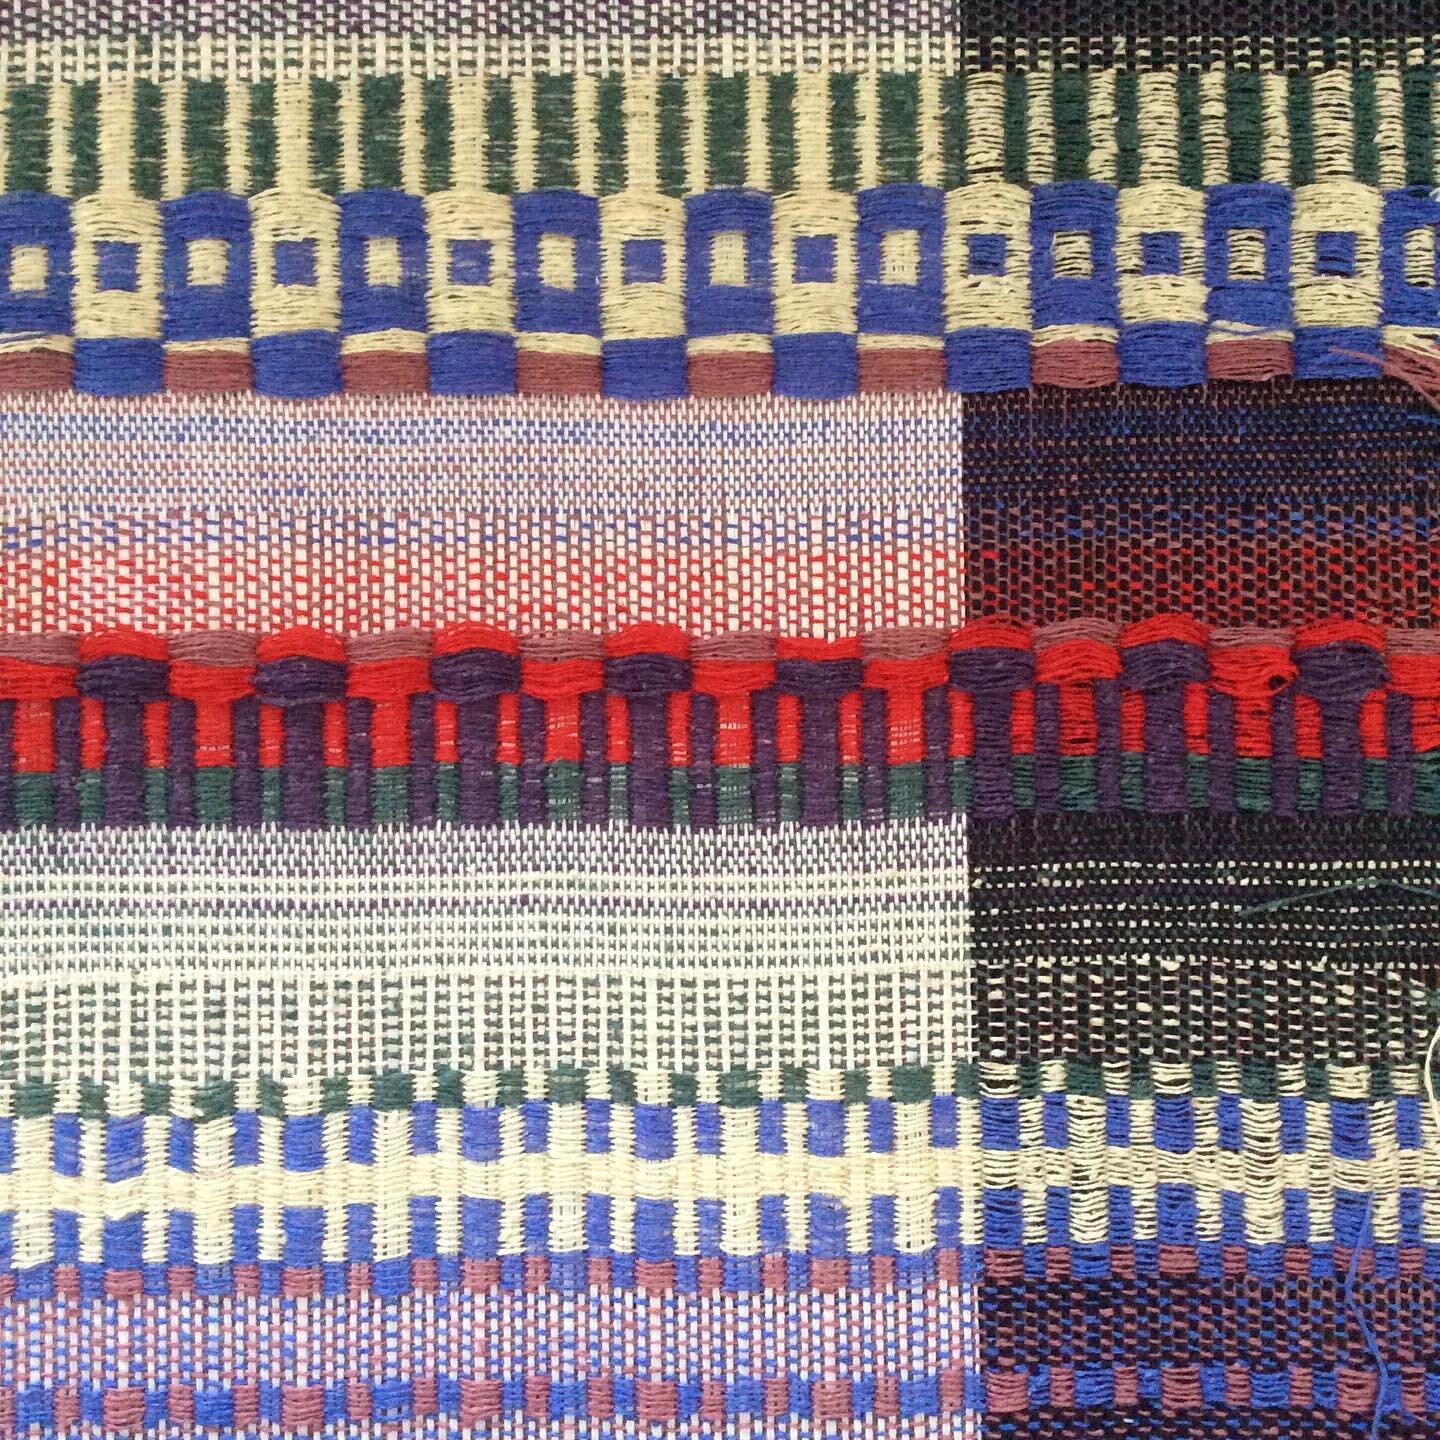 Today&rsquo;s weaving! Progress is slow but progress is progress, right!?
#weaving #handweaving #dobbyloom #harrisloom #textileartist #textileart #textiledesign #textiledesigner #creativepractice #creativerecovery 🙂